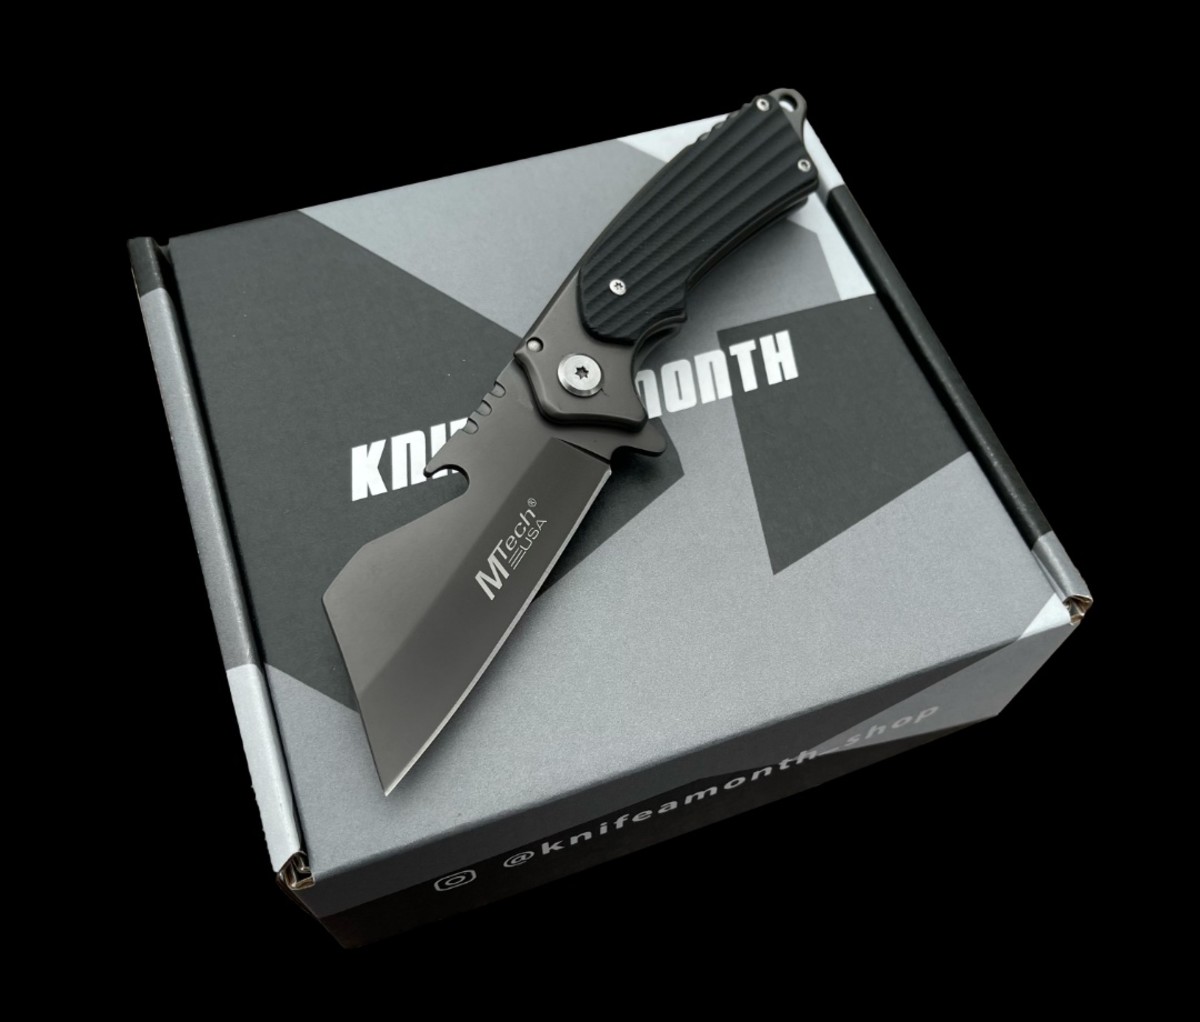 Knife-A-Month subscription box